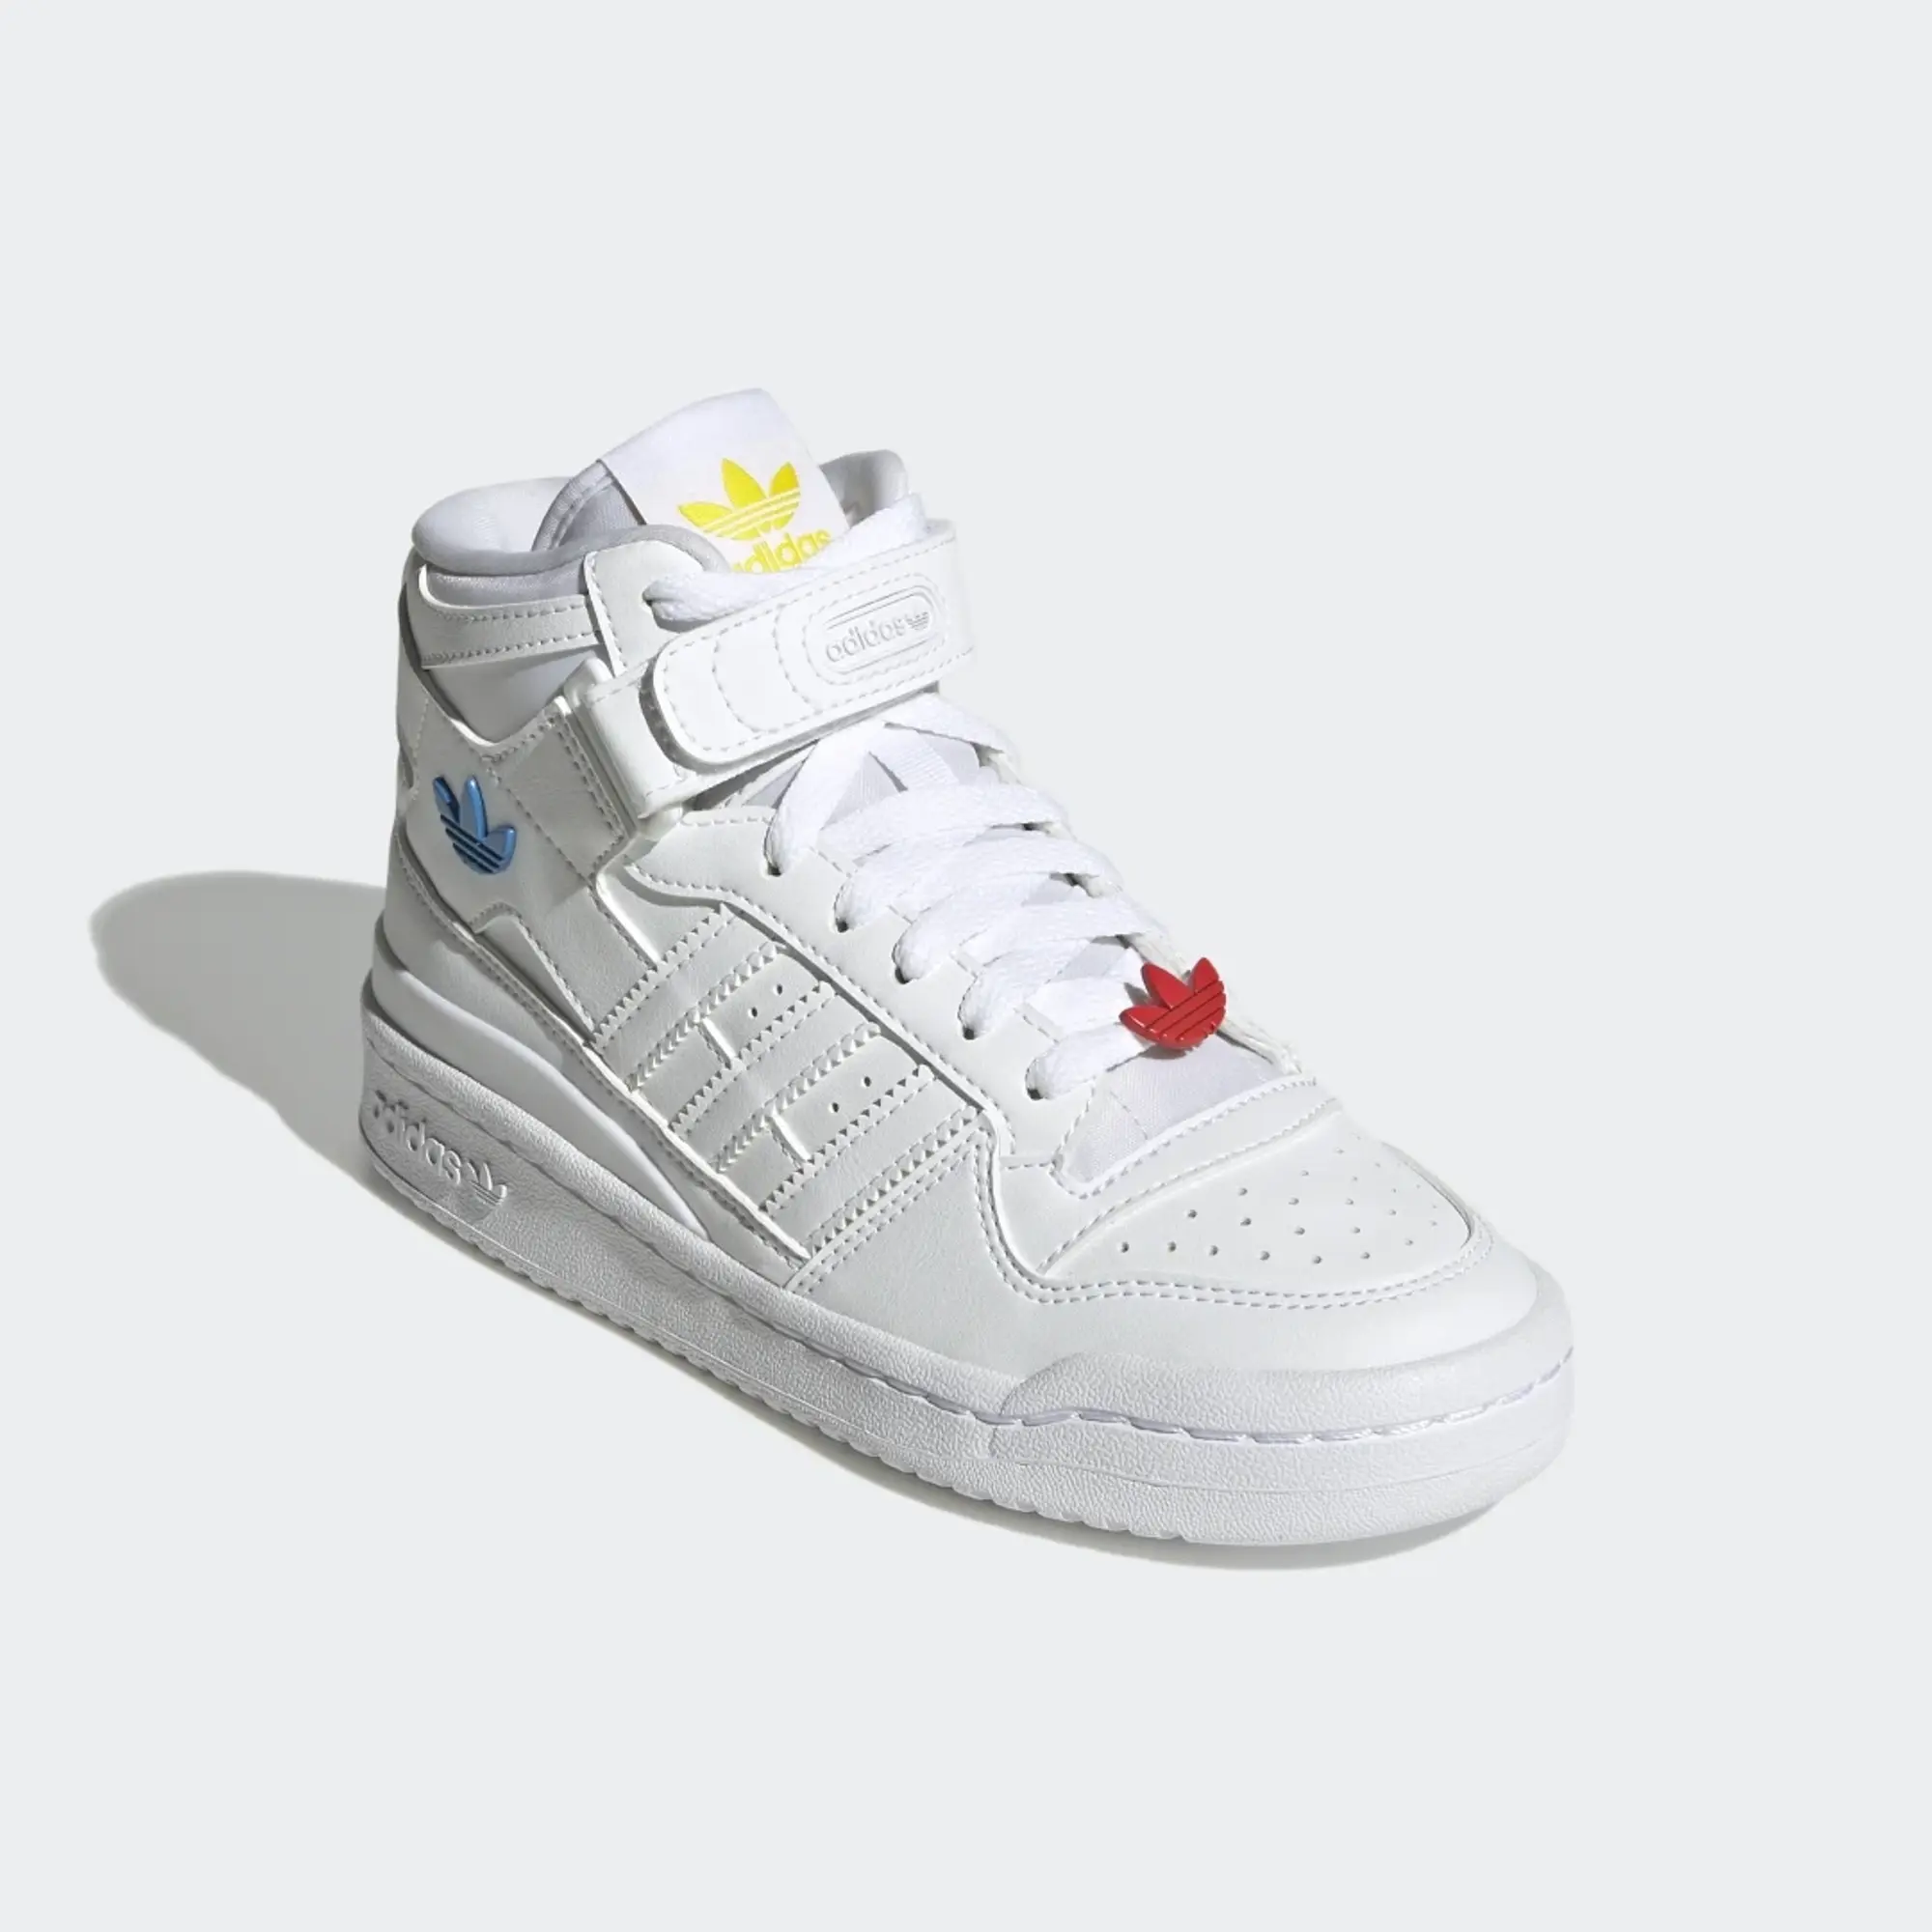 adidas Forum Mid Shoes - Cloud White / Red / Bright Blue